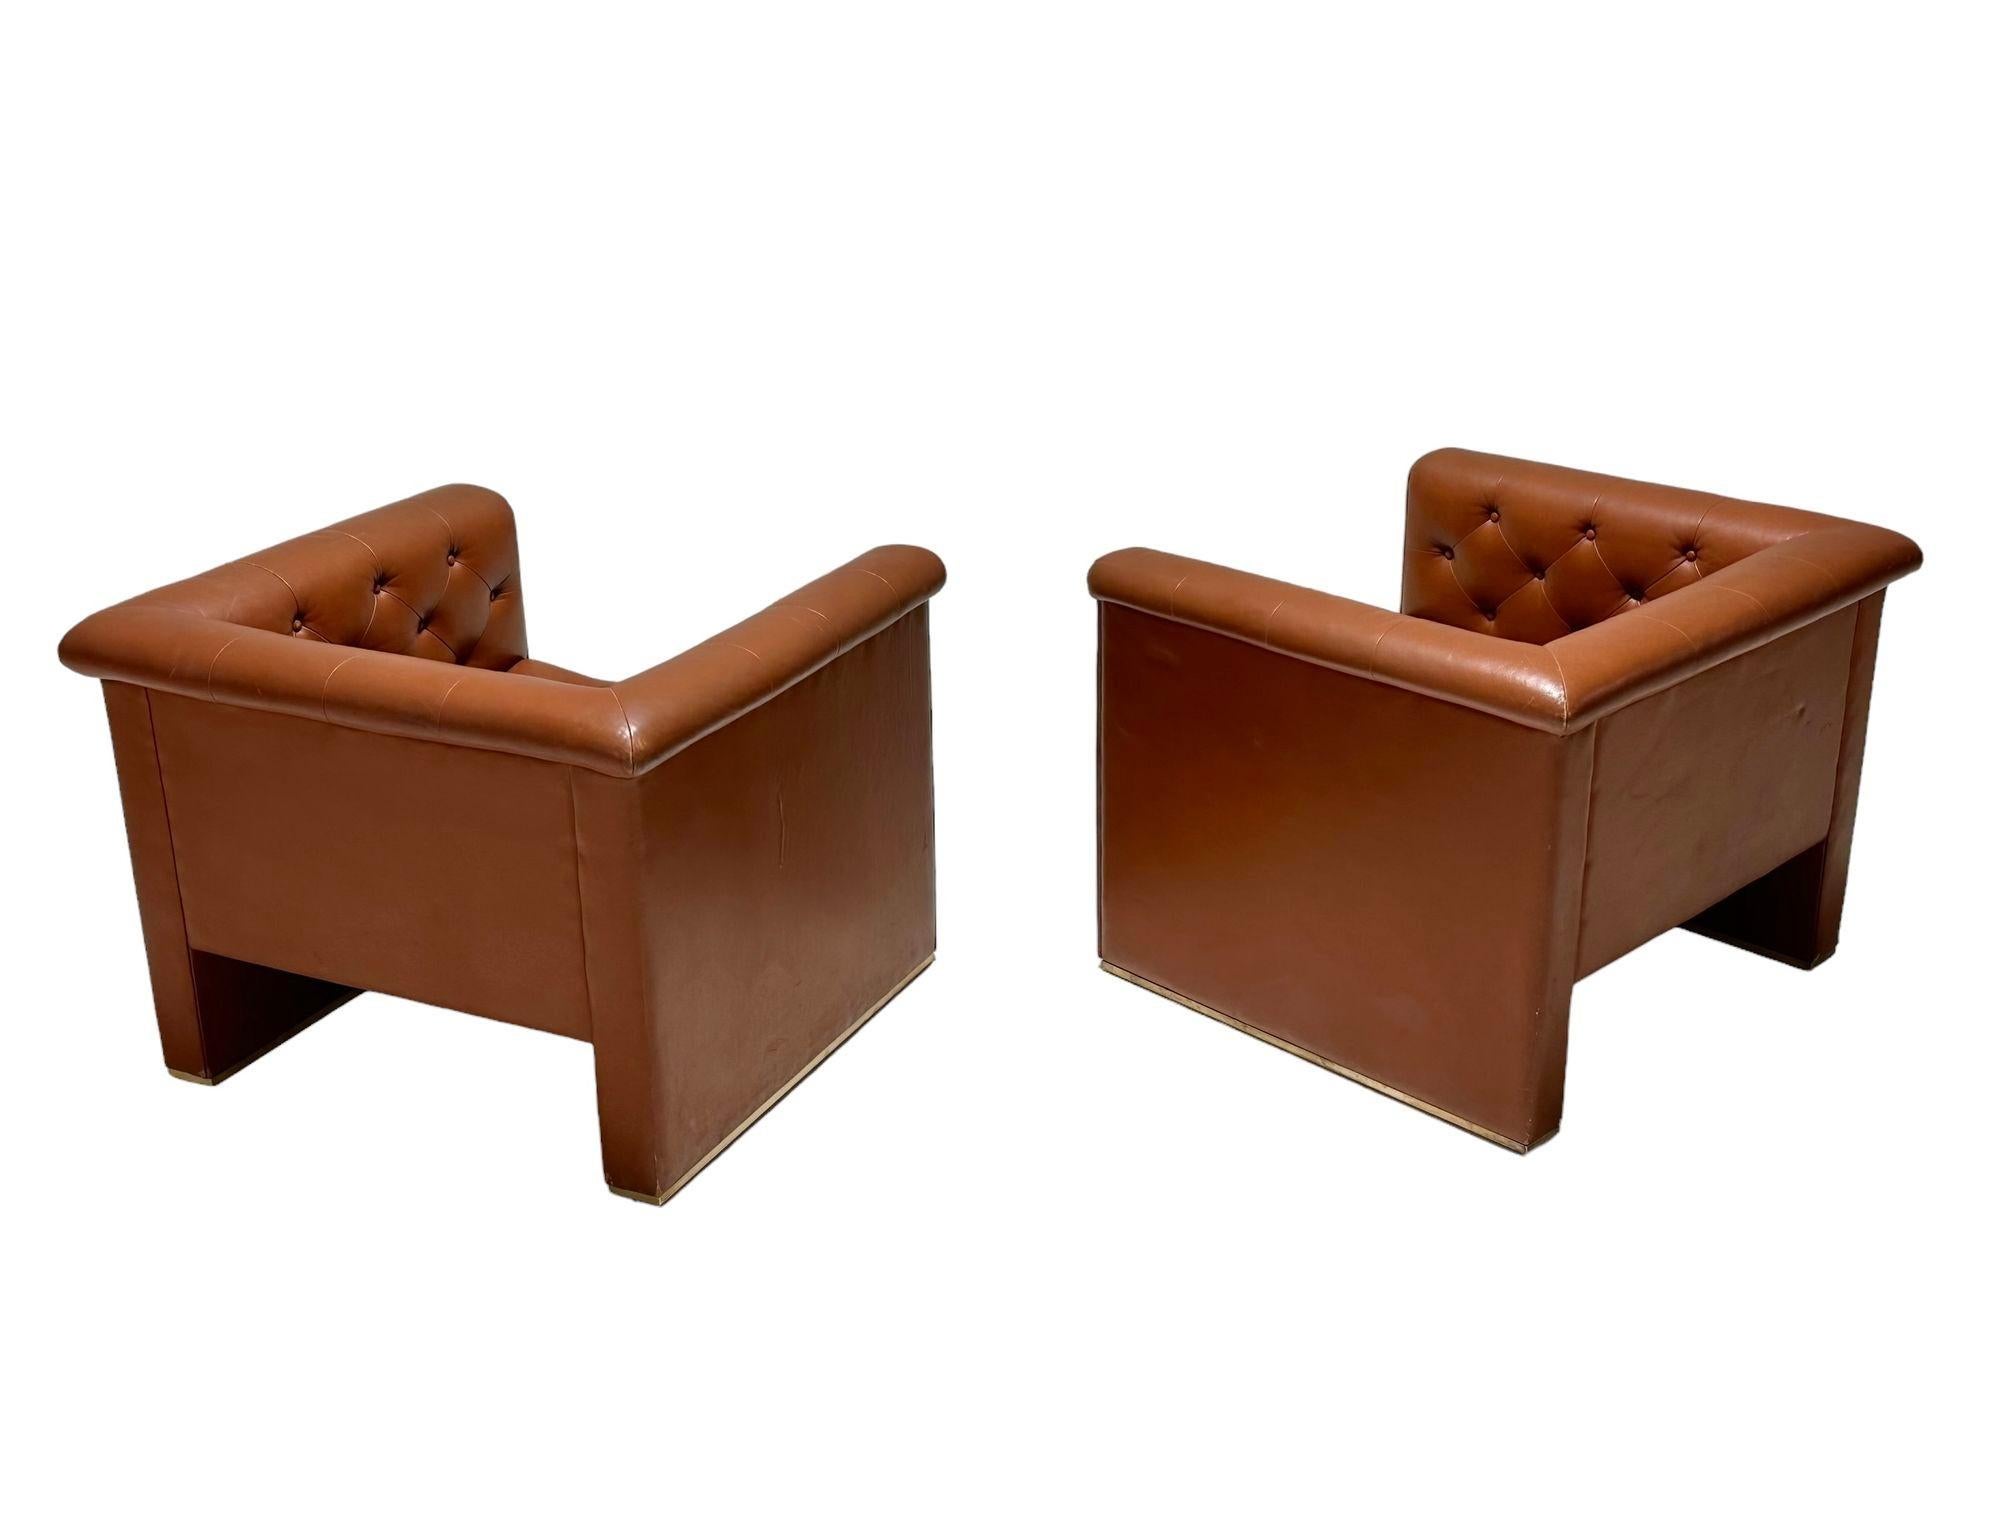 American Pair Tufted Cube Leather Club Chairs, 1970 For Sale